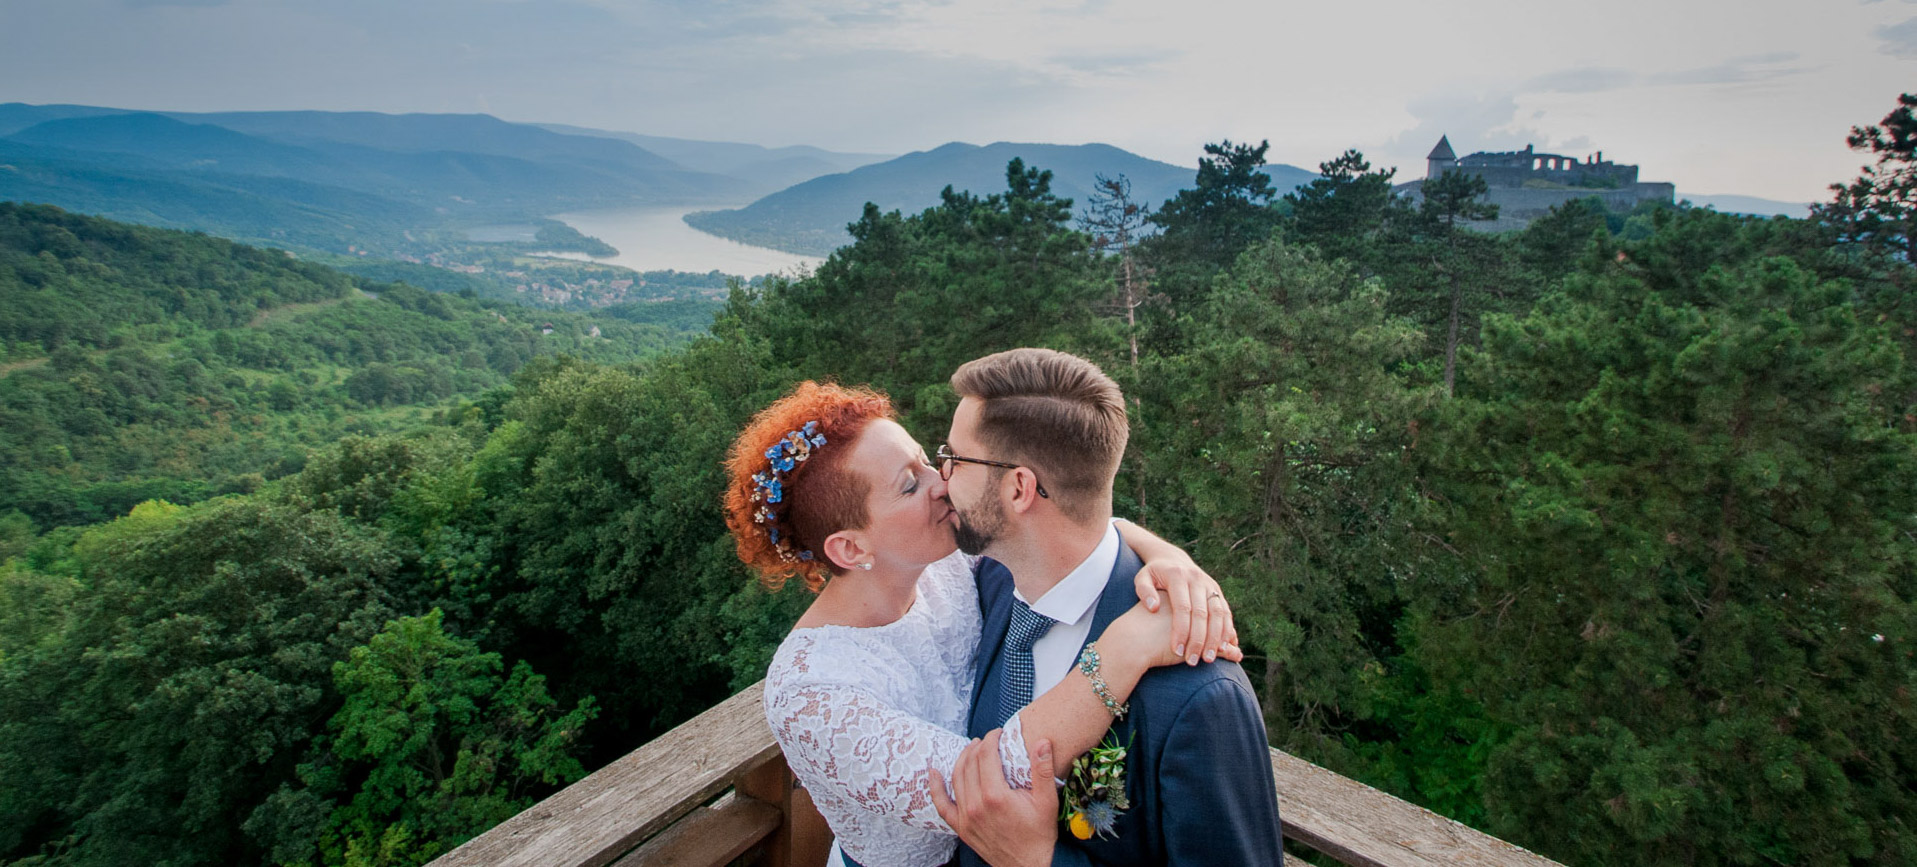 Riverside adventure wedding in HUngary, at the Danube Bend - couple kissing on a view point, with the hills and Danube river behind them